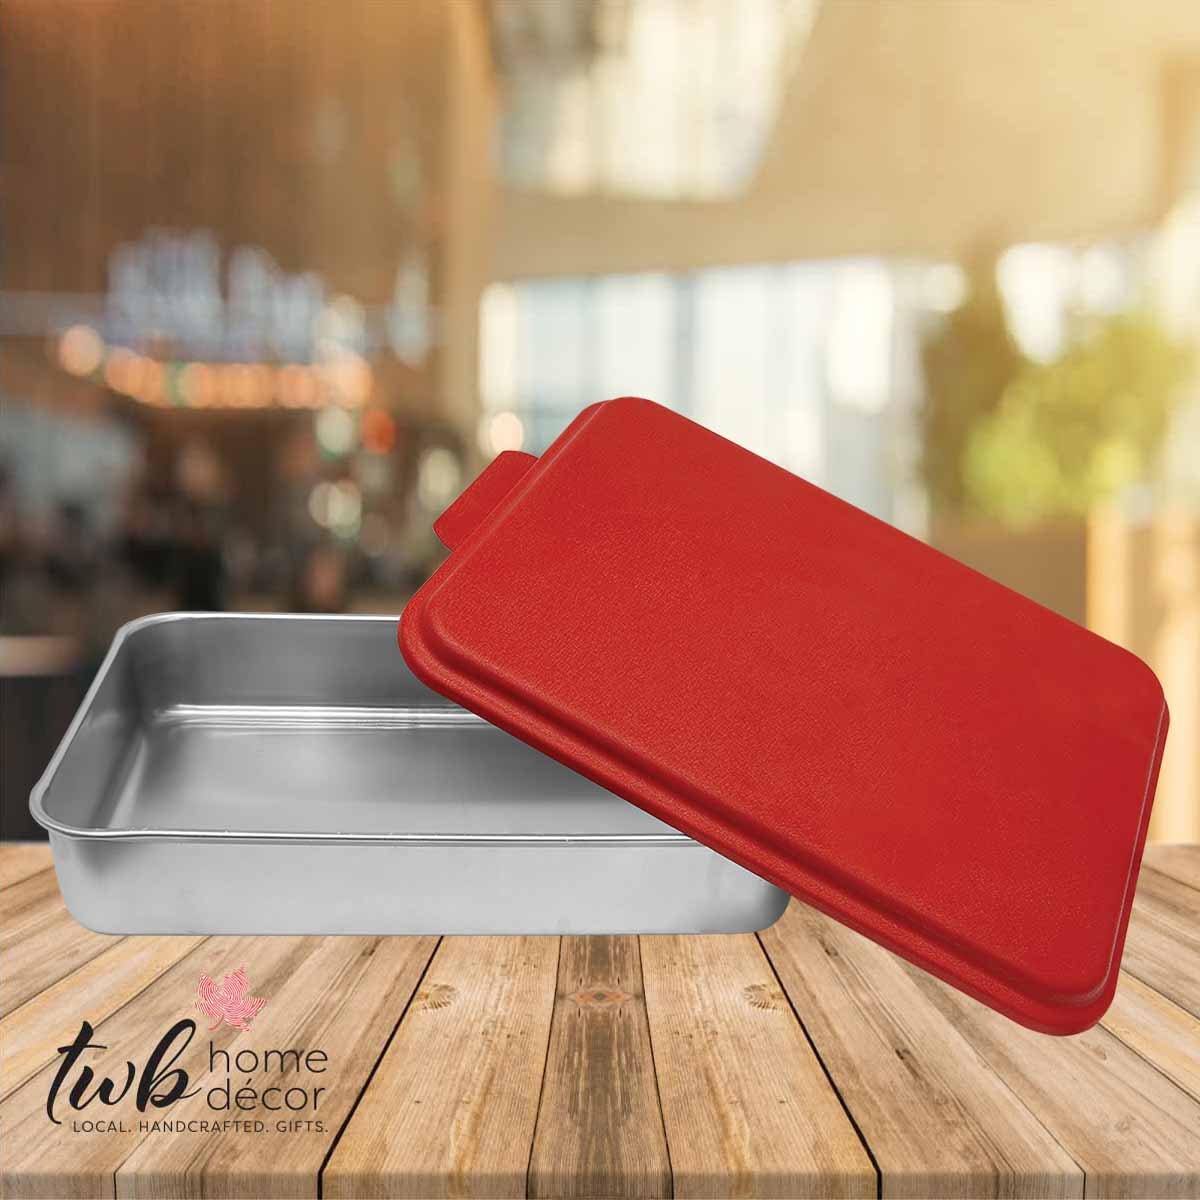 Home of Meals & Memories Cake Pan with lid - CUSTOM - TWB Home Decor